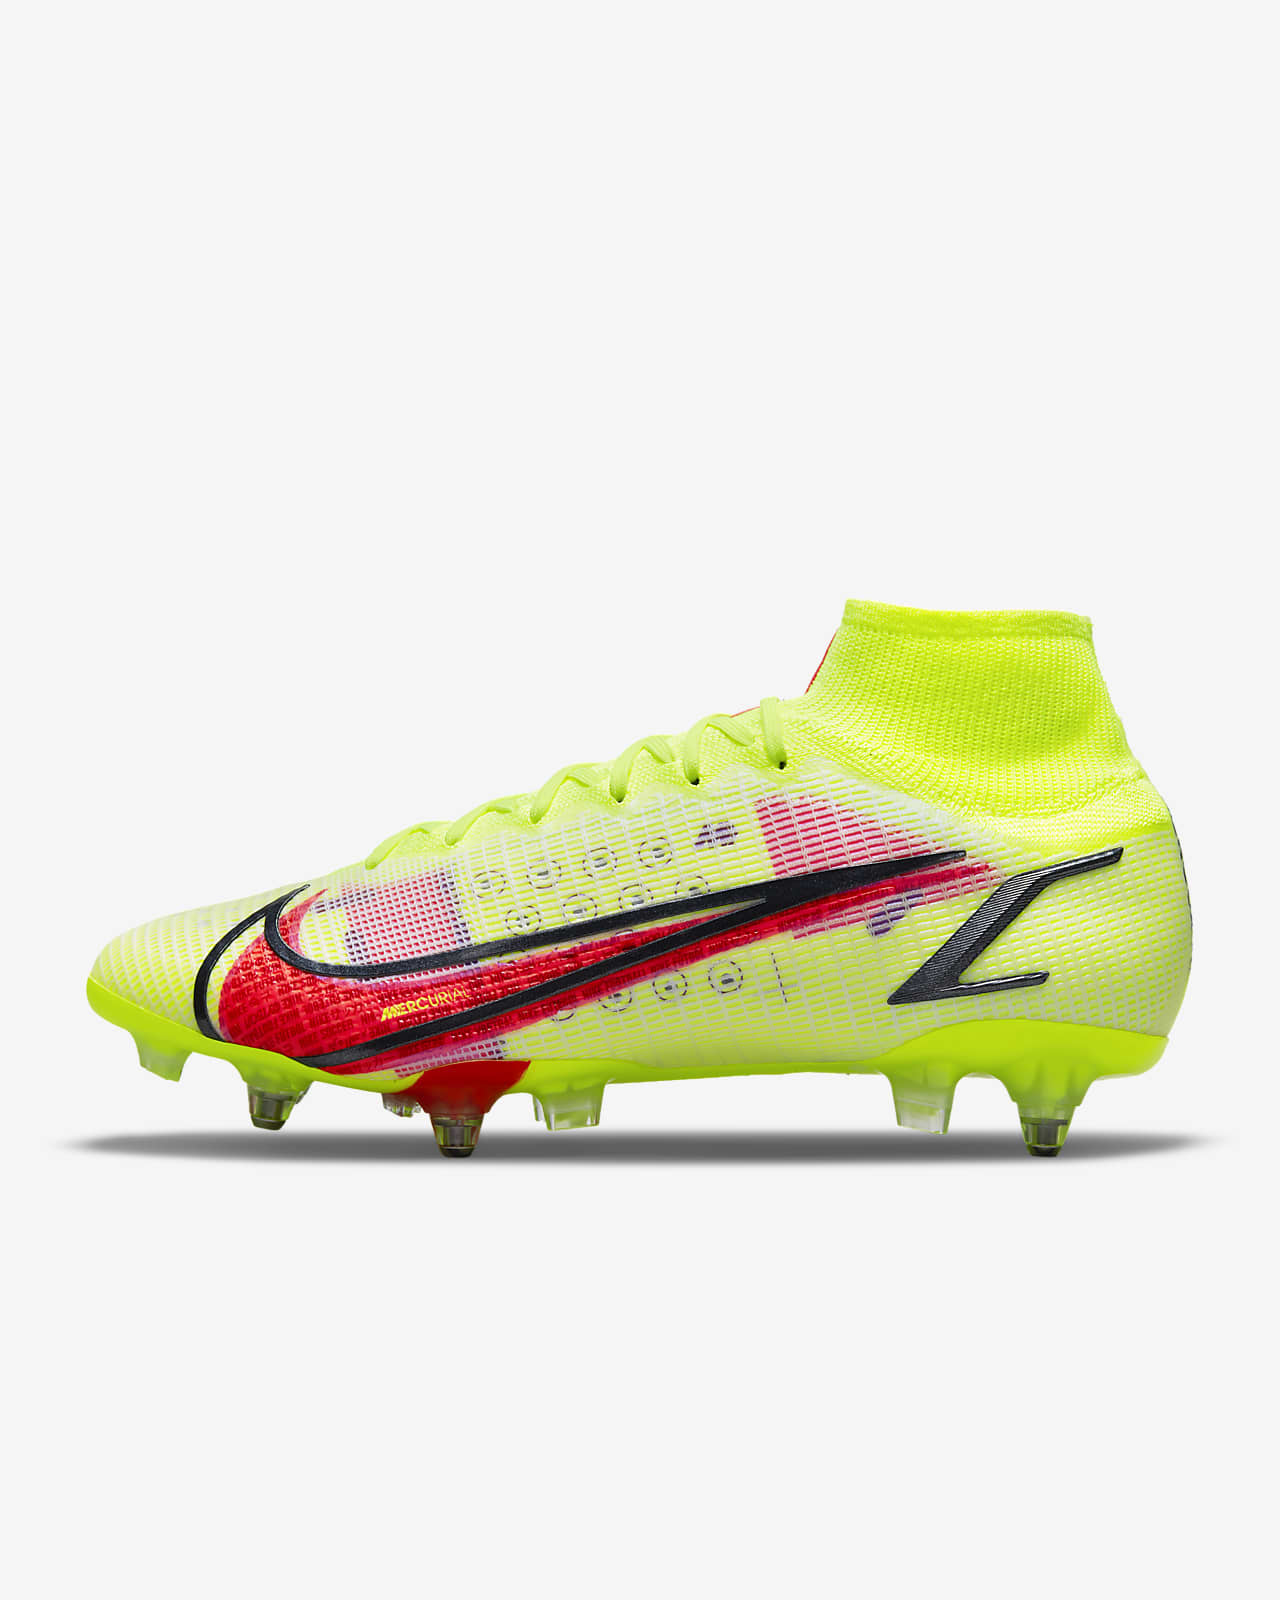 Nike Mercurial Superfly 8 Elite SG-Pro AC Soft-Ground Football Boot